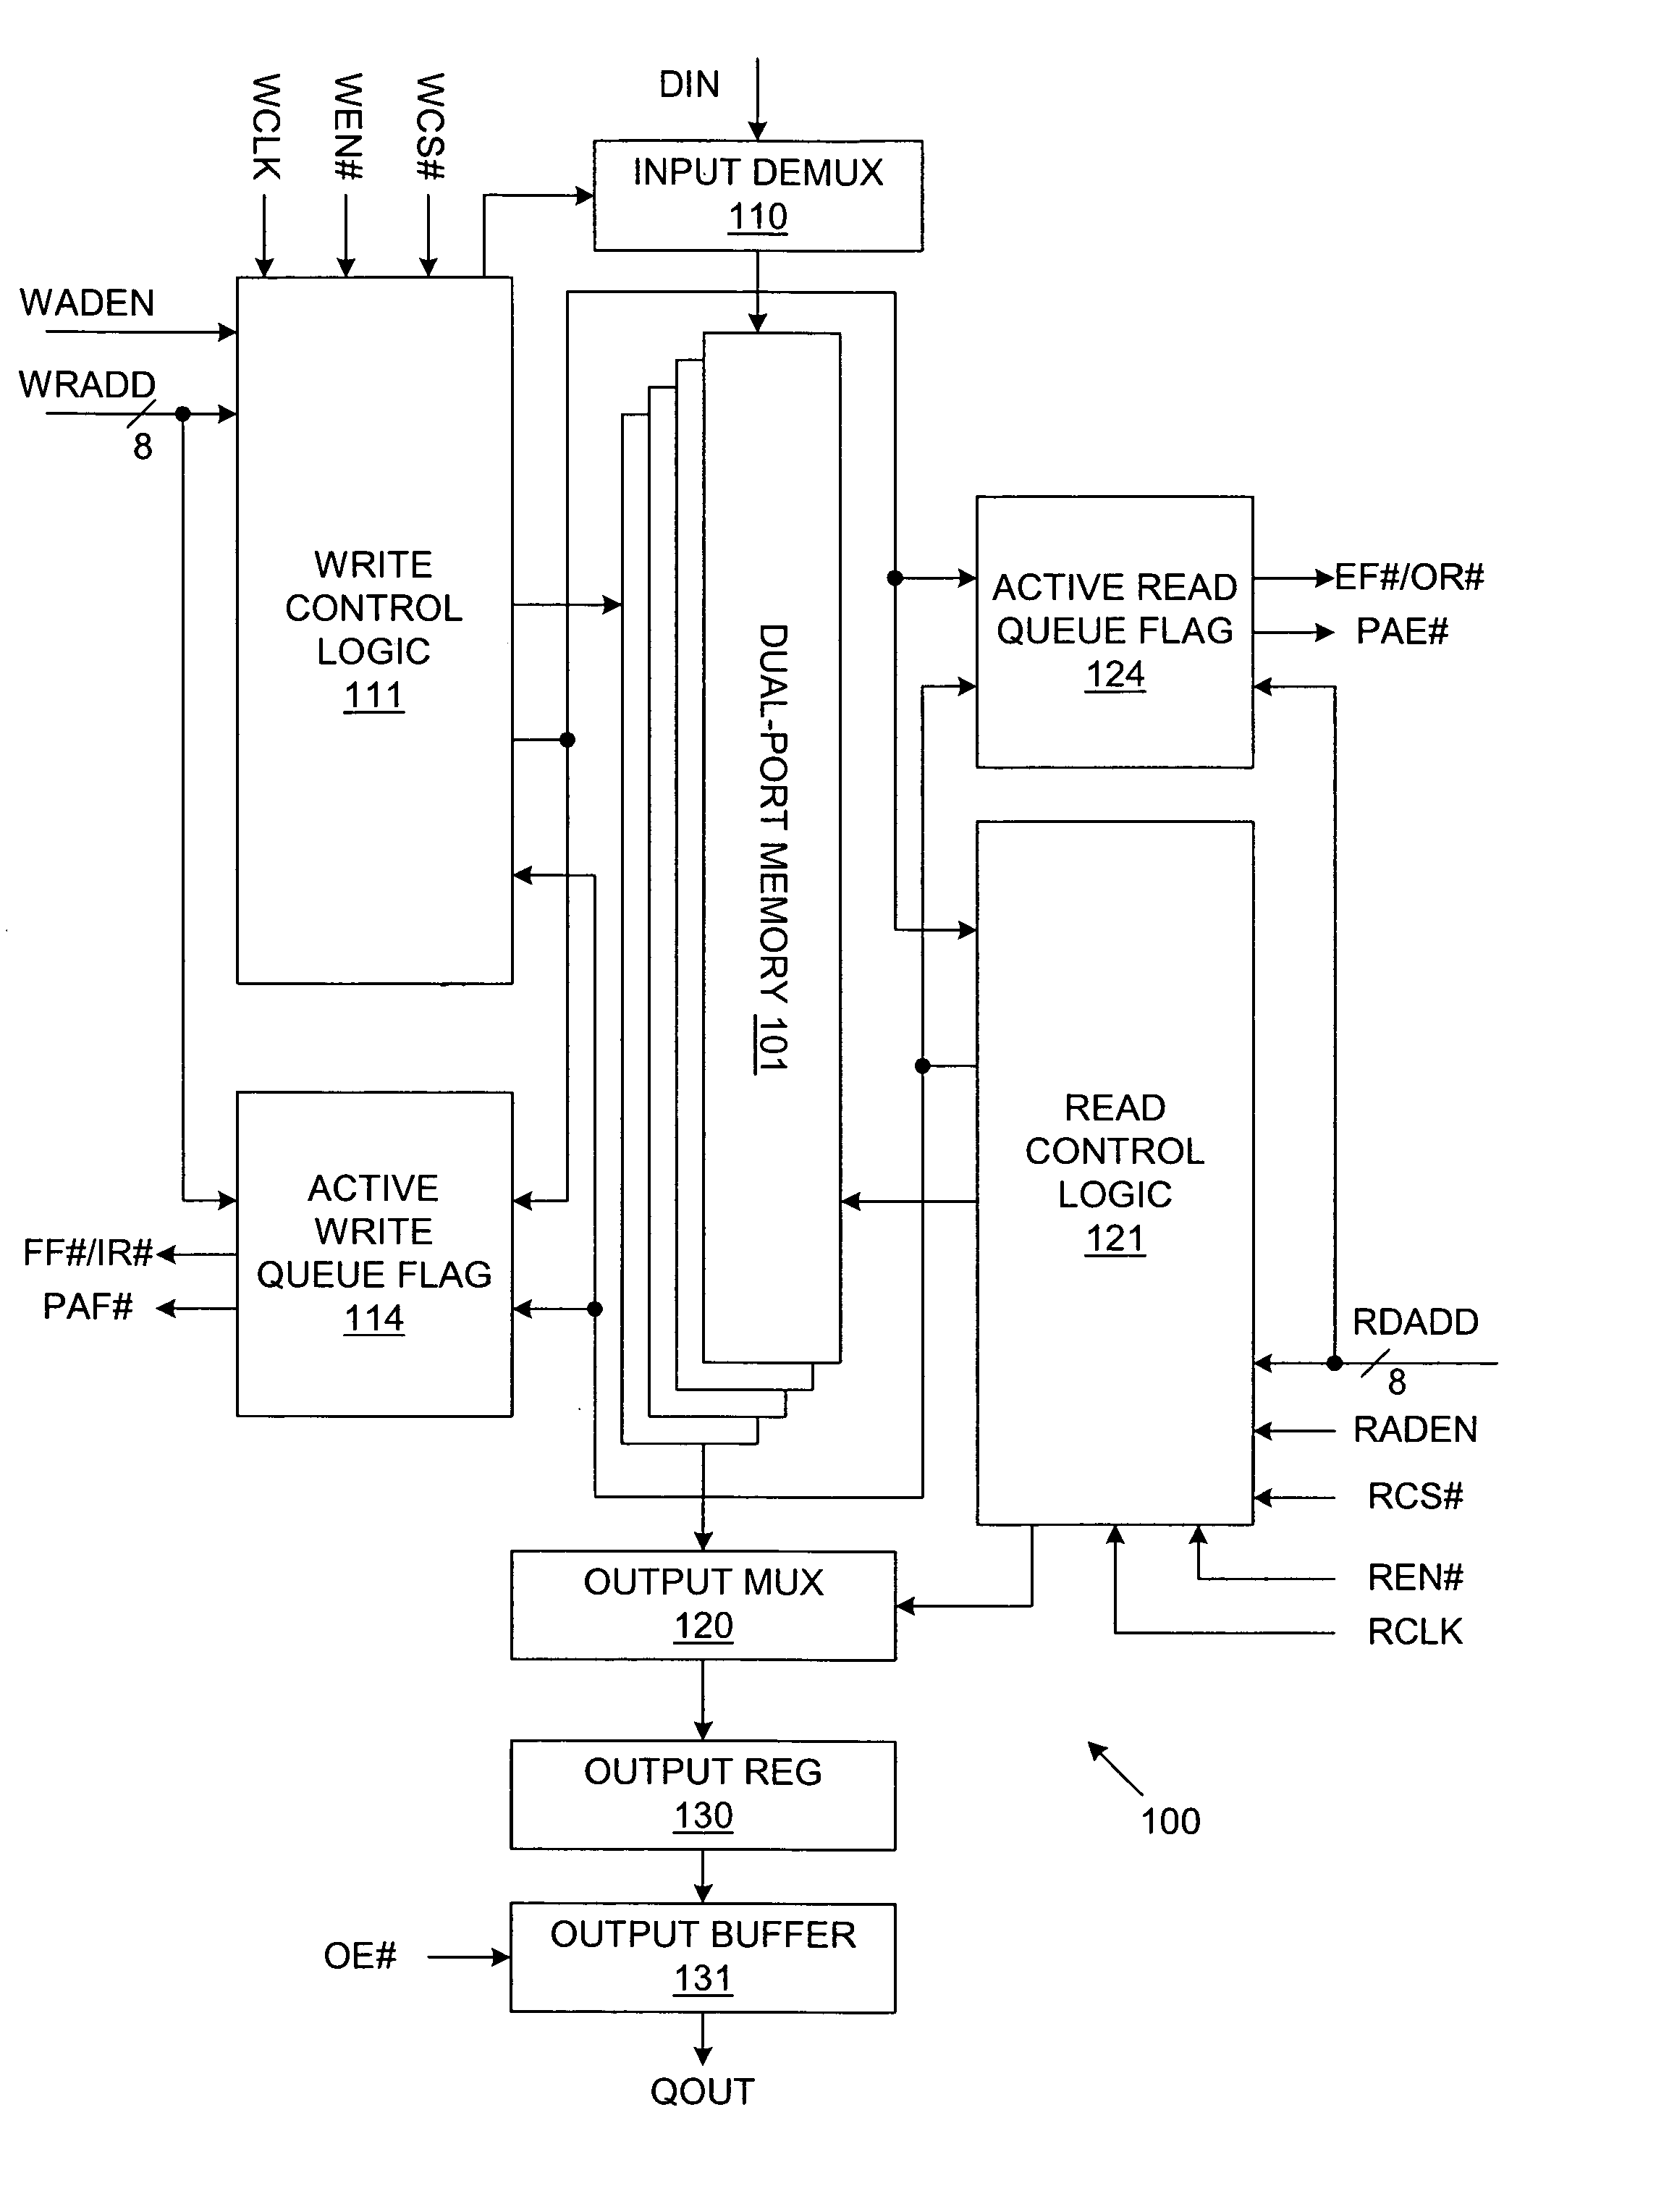 Multi-queue address generator for start and end addresses in a multi-queue first-in first-out memory system